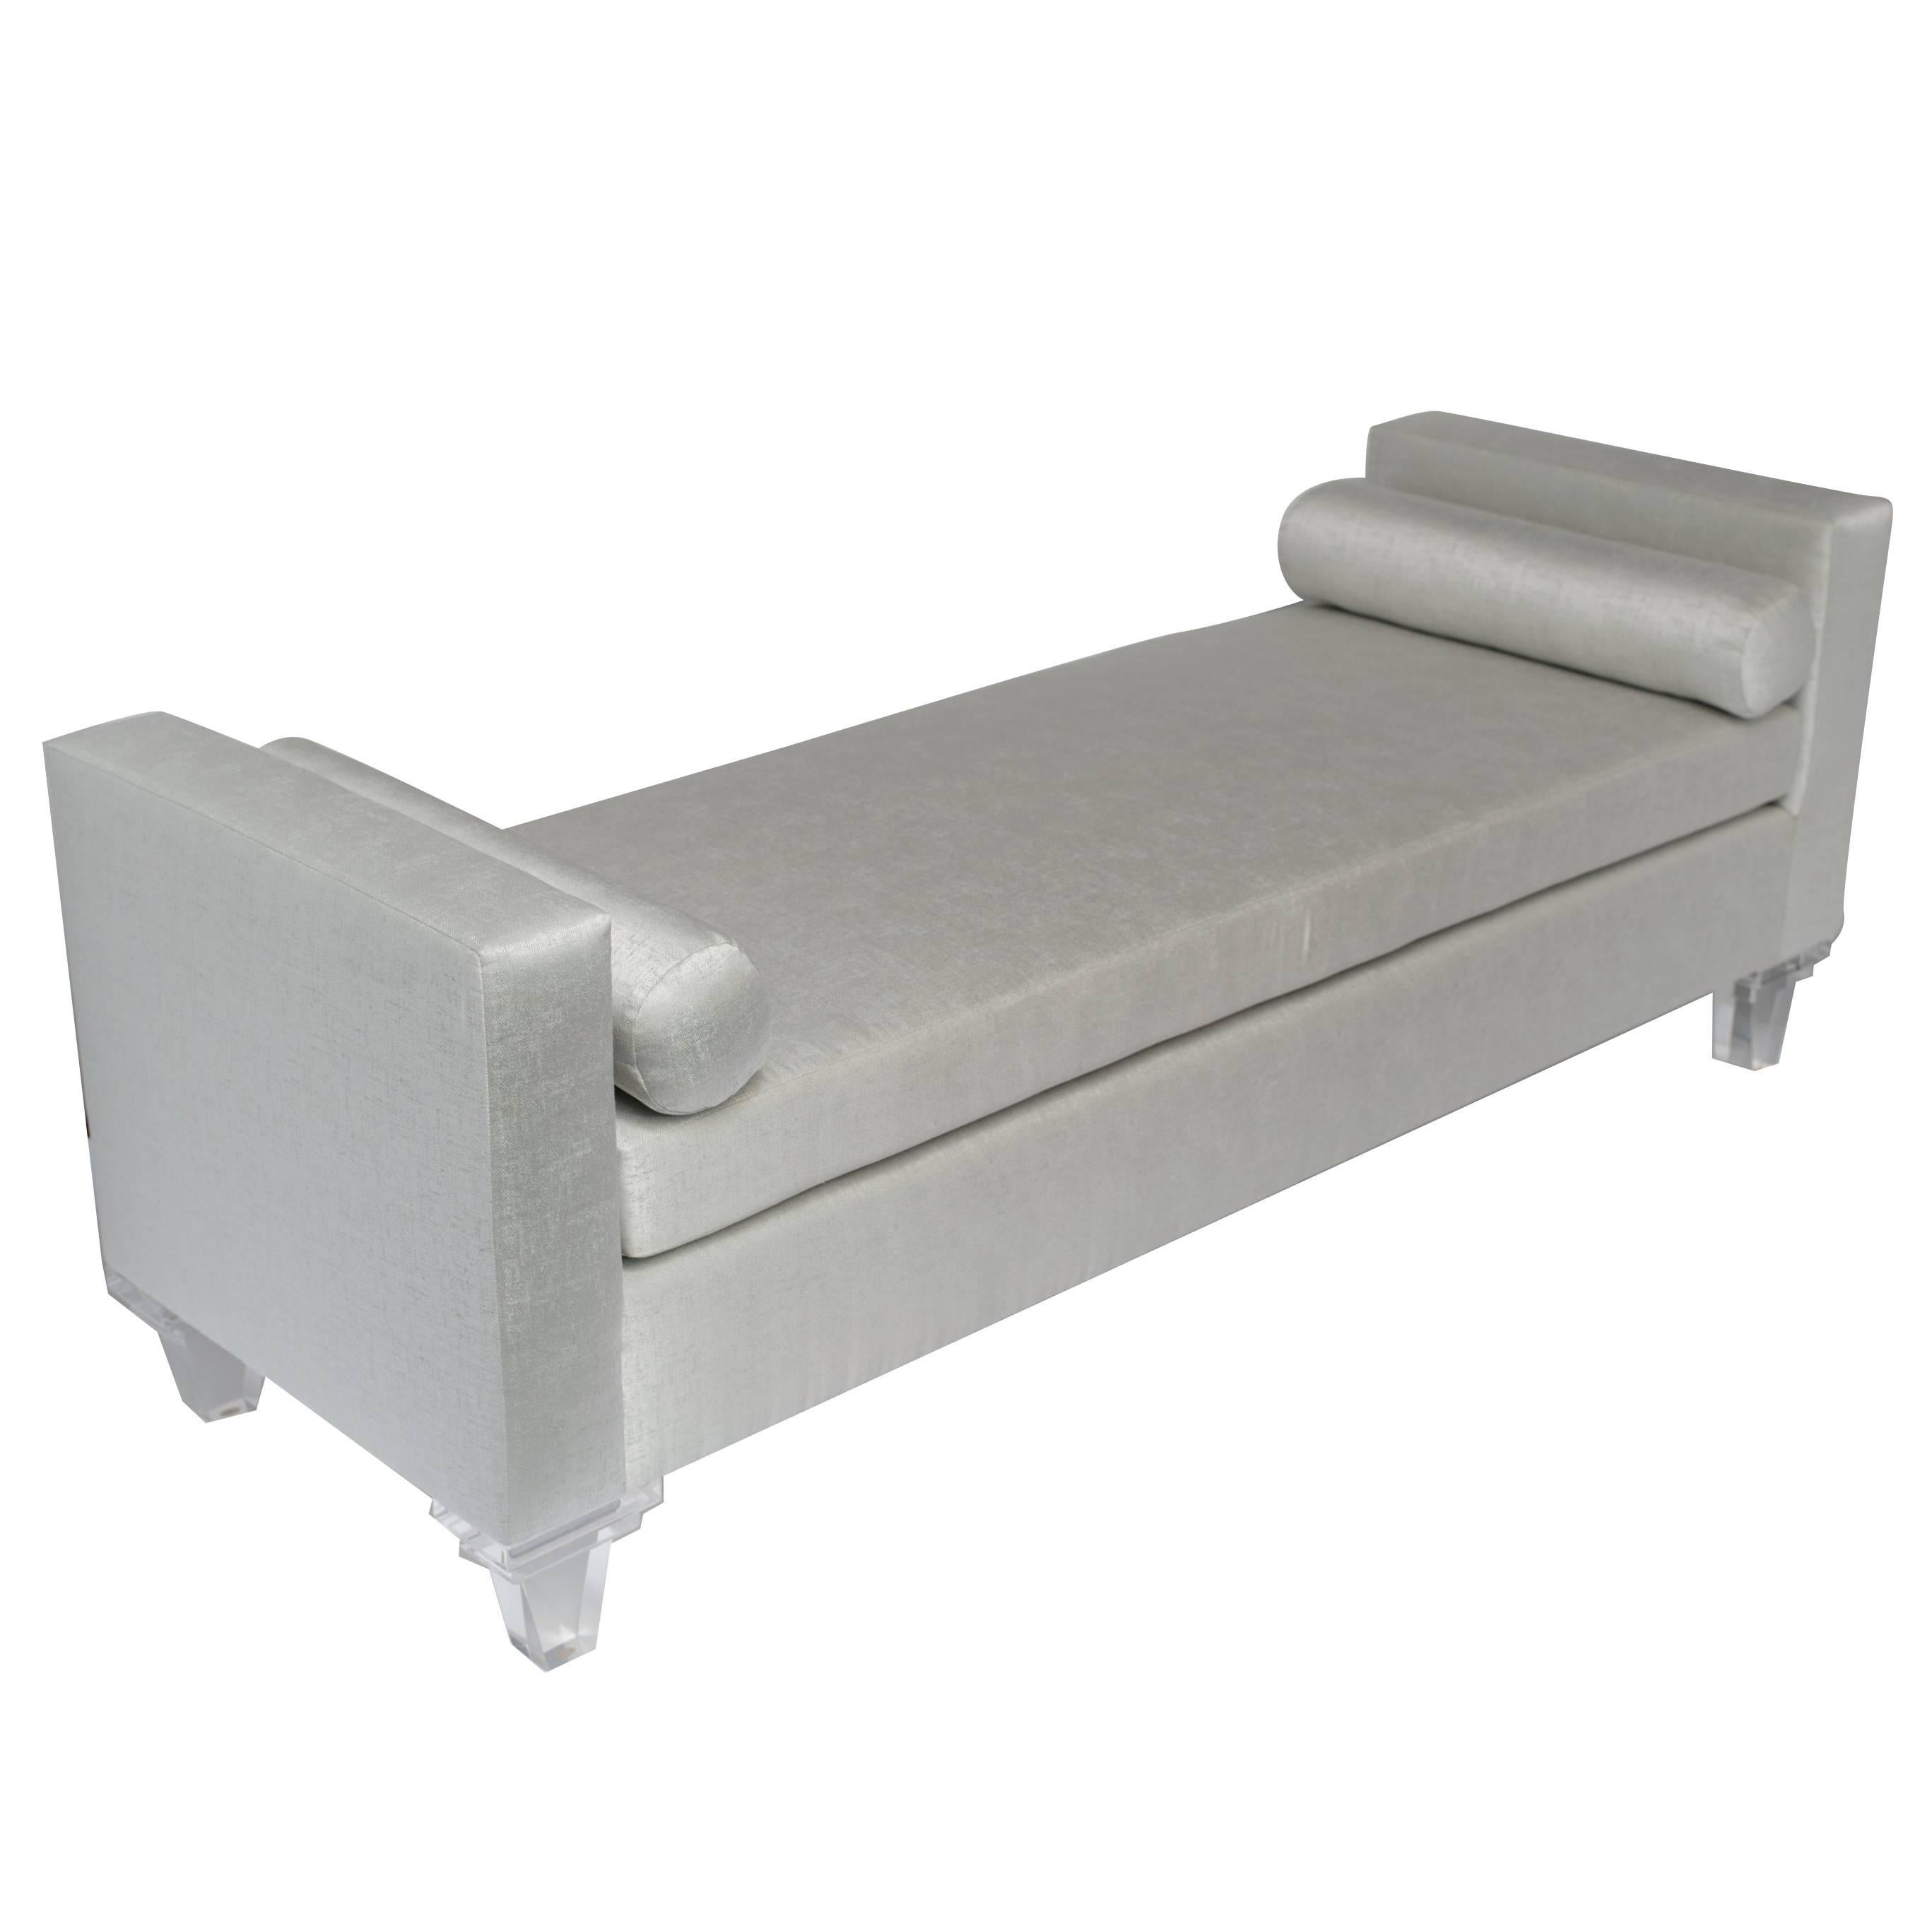 Hollywood regency mid-century modern style daybed and chaise lounge. Elegant silver mist upholstery has woven fibers with hints of platinum silver and very mild hints of sea mist green. The streamline daybed features two bolster pillows and has